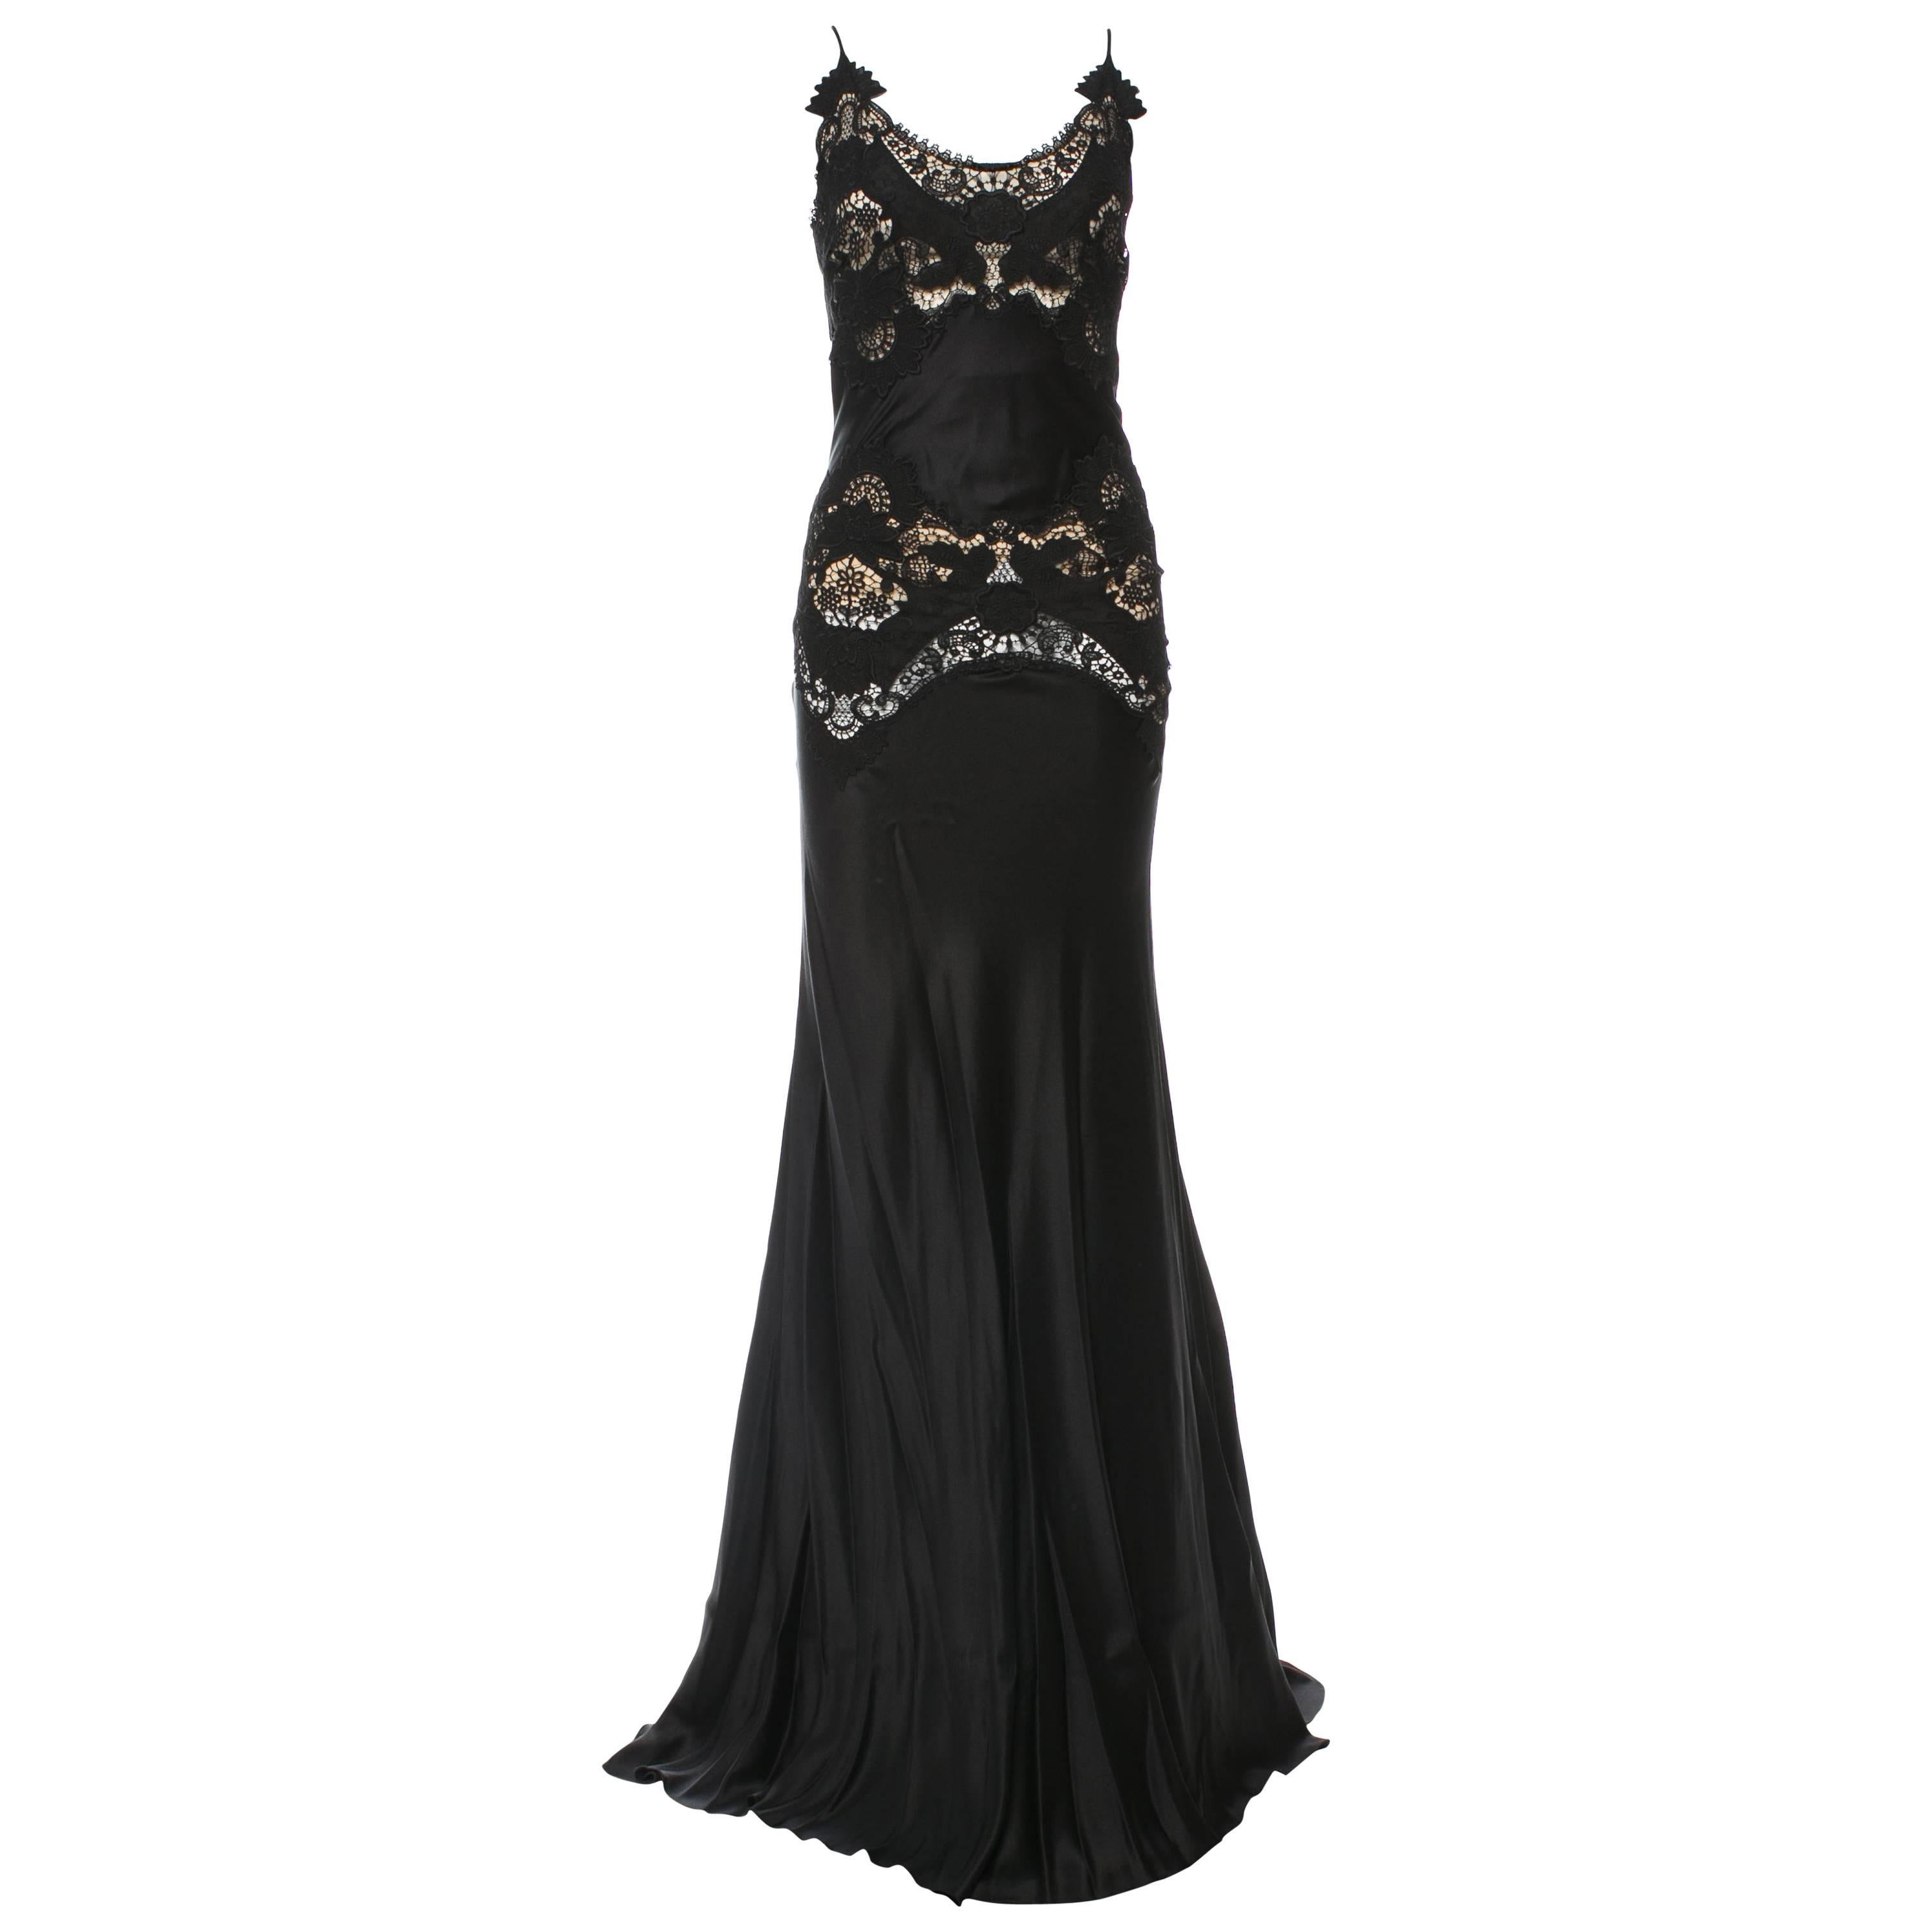 Alexander McQueen Black Evening Dress with Sheer Guipure Lace Details 2004 Sz 46 For Sale